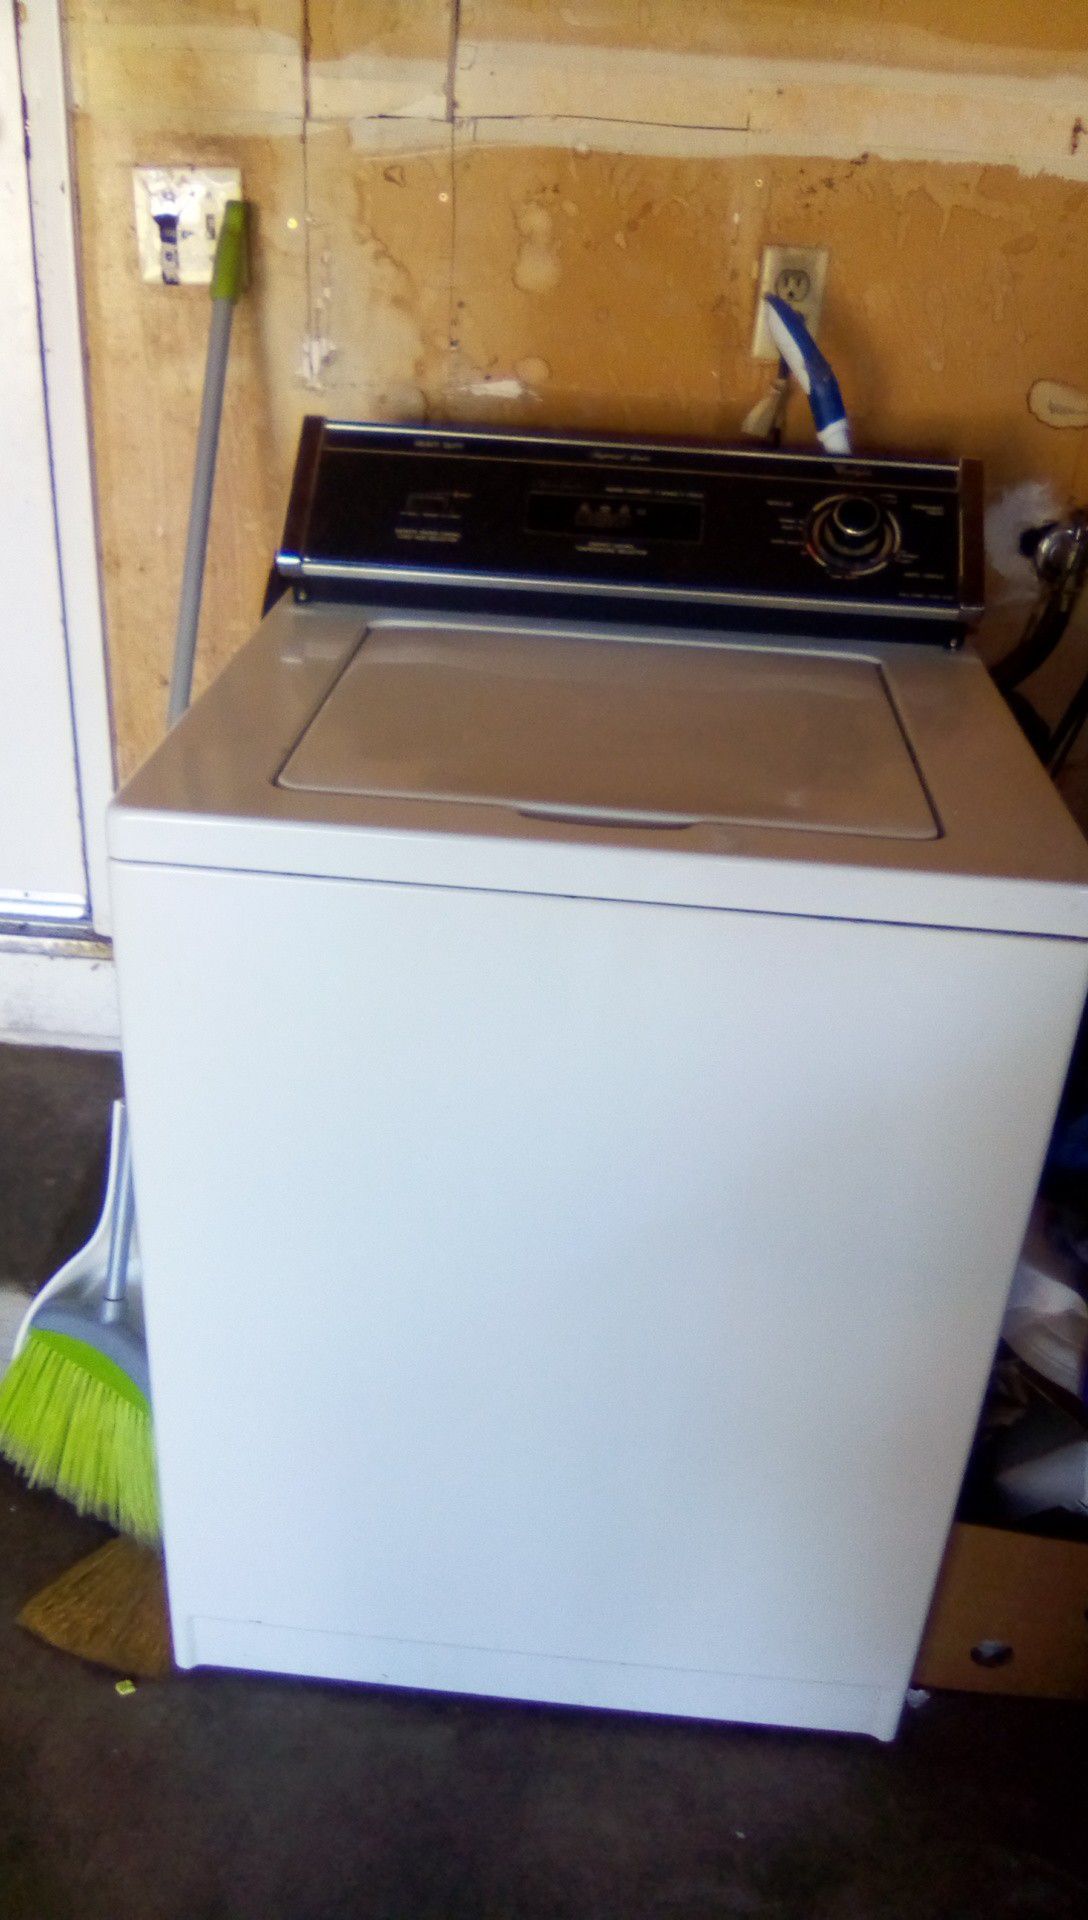 Whirlpool Imperial Series Washer and Whirlpool Cabrio Dryer